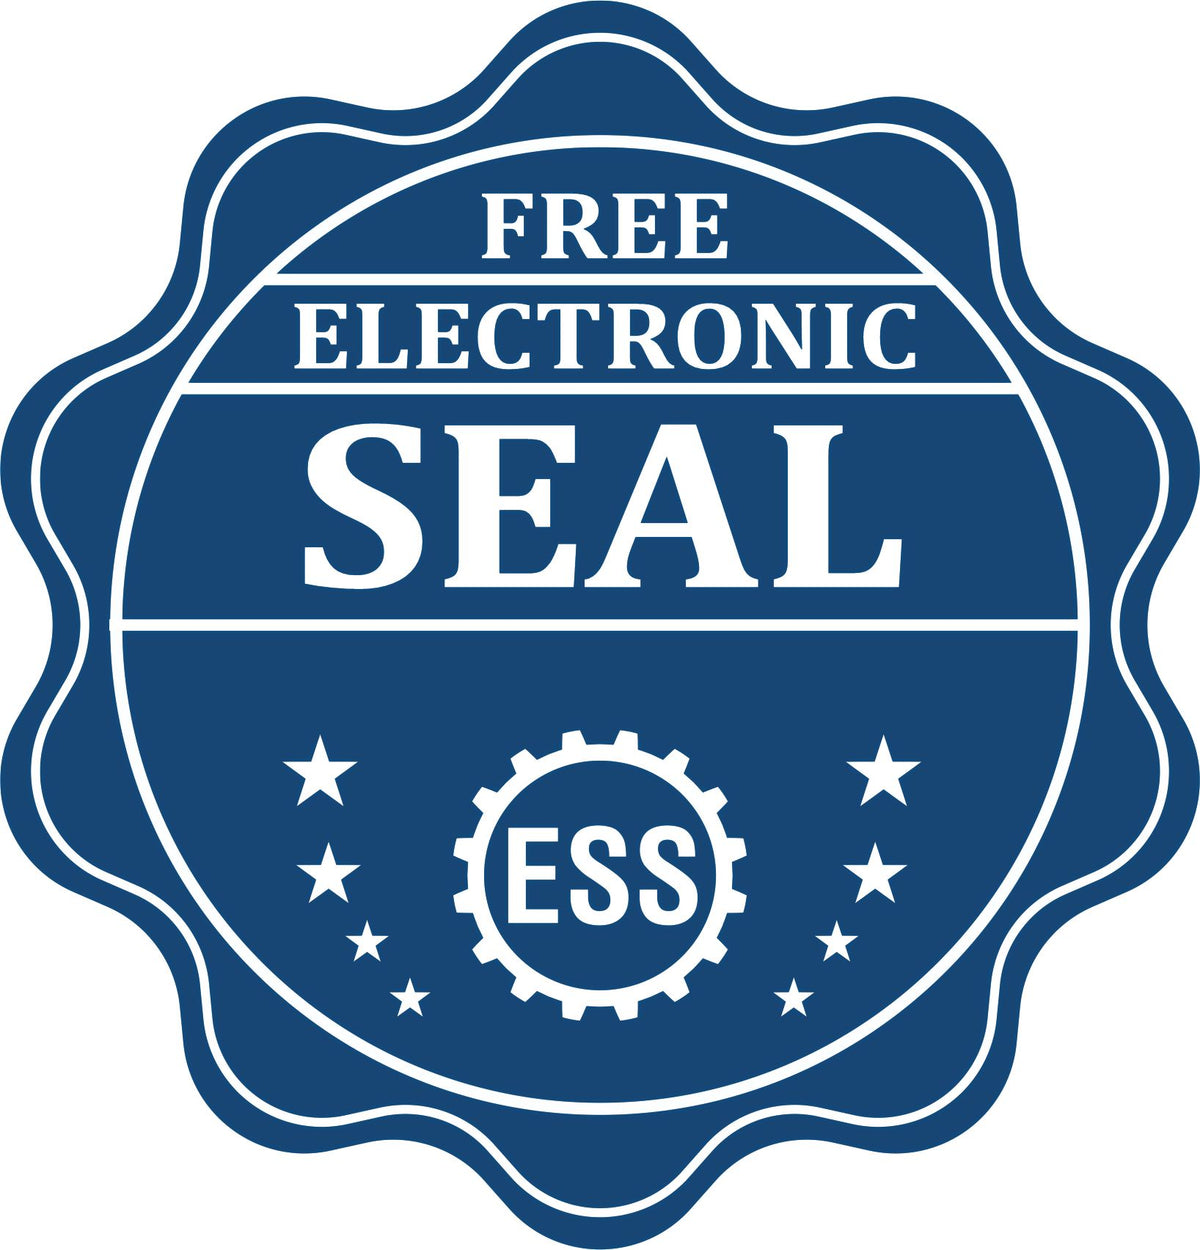 A badge showing a free electronic seal for the Idaho Professional Engineer Seal Stamp with stars and the ESS gear on the emblem.